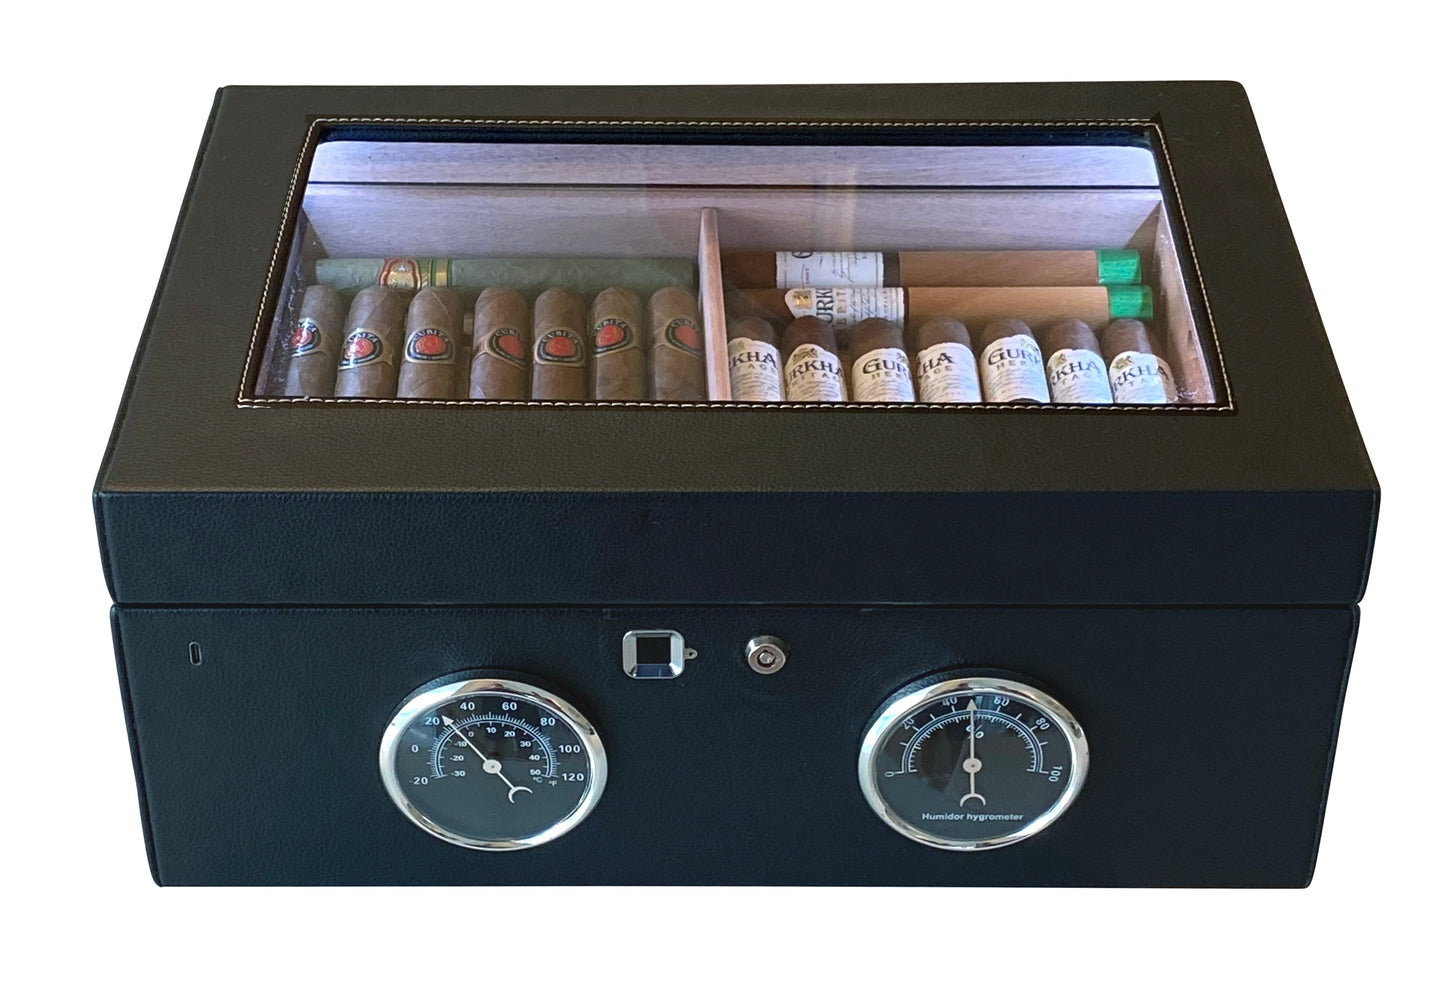 The Lemans GT Humidor.